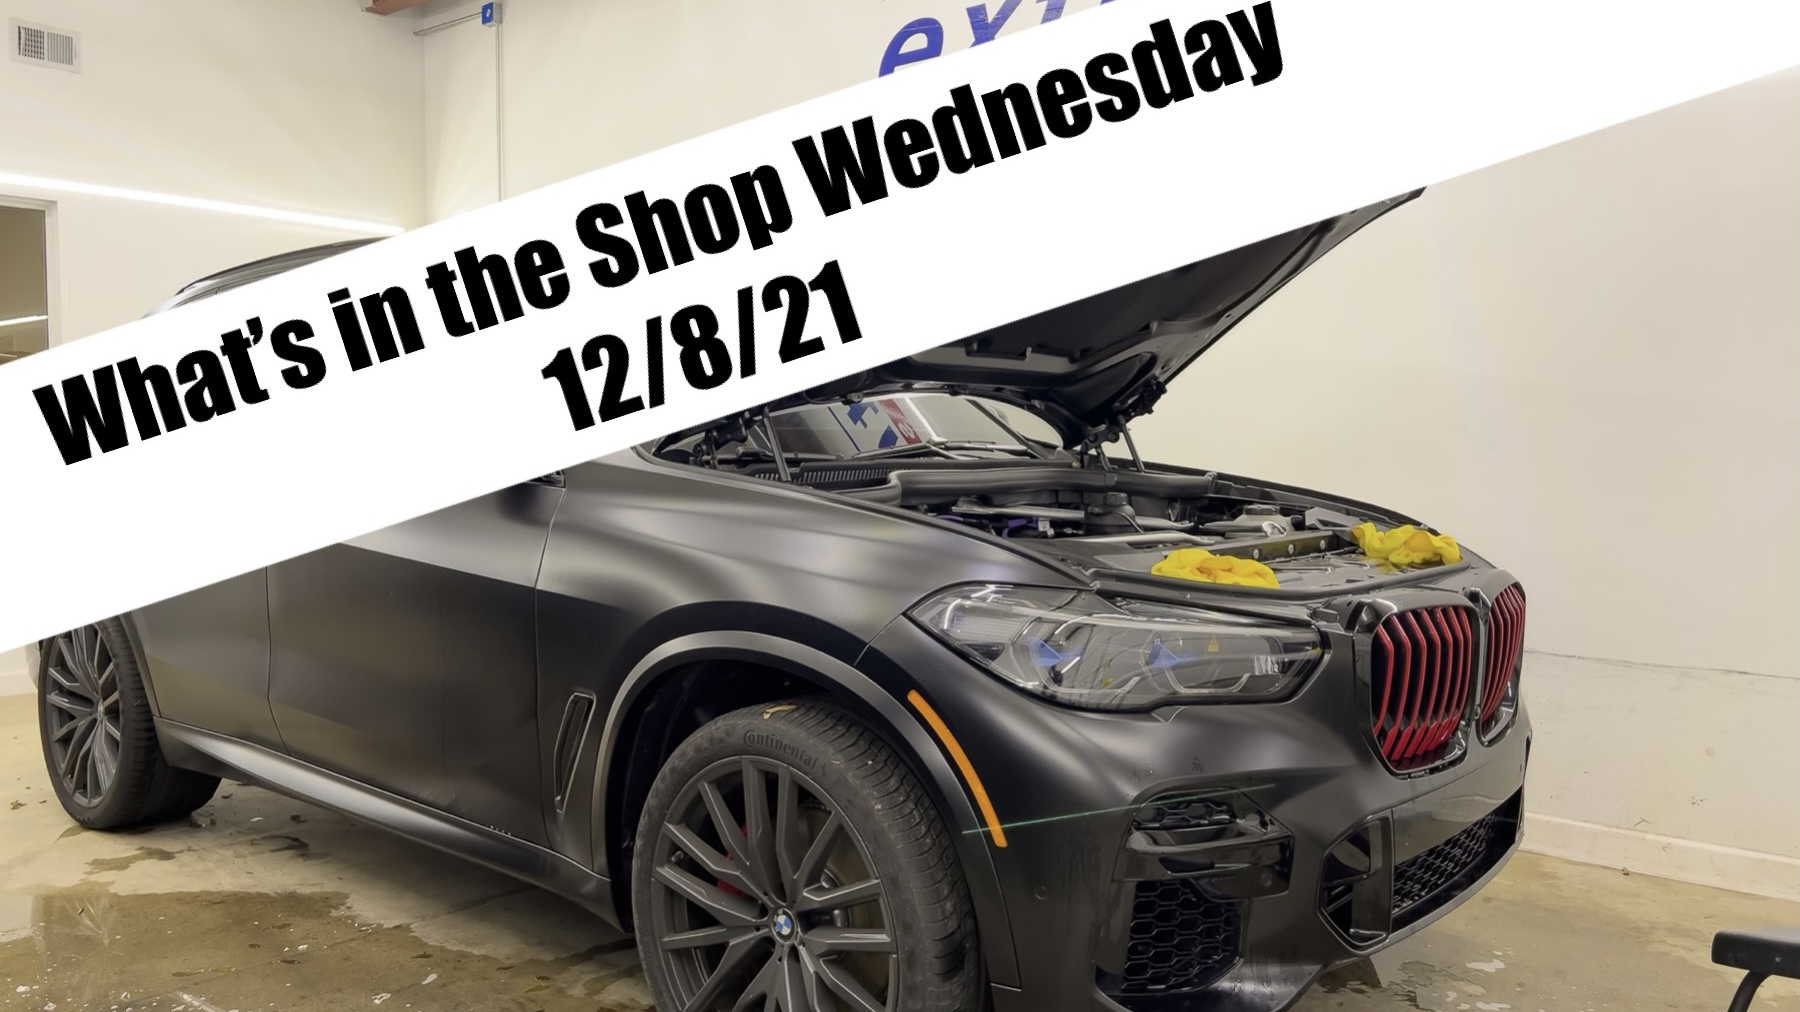 What’s in the Shop Wednesday 12/8/21